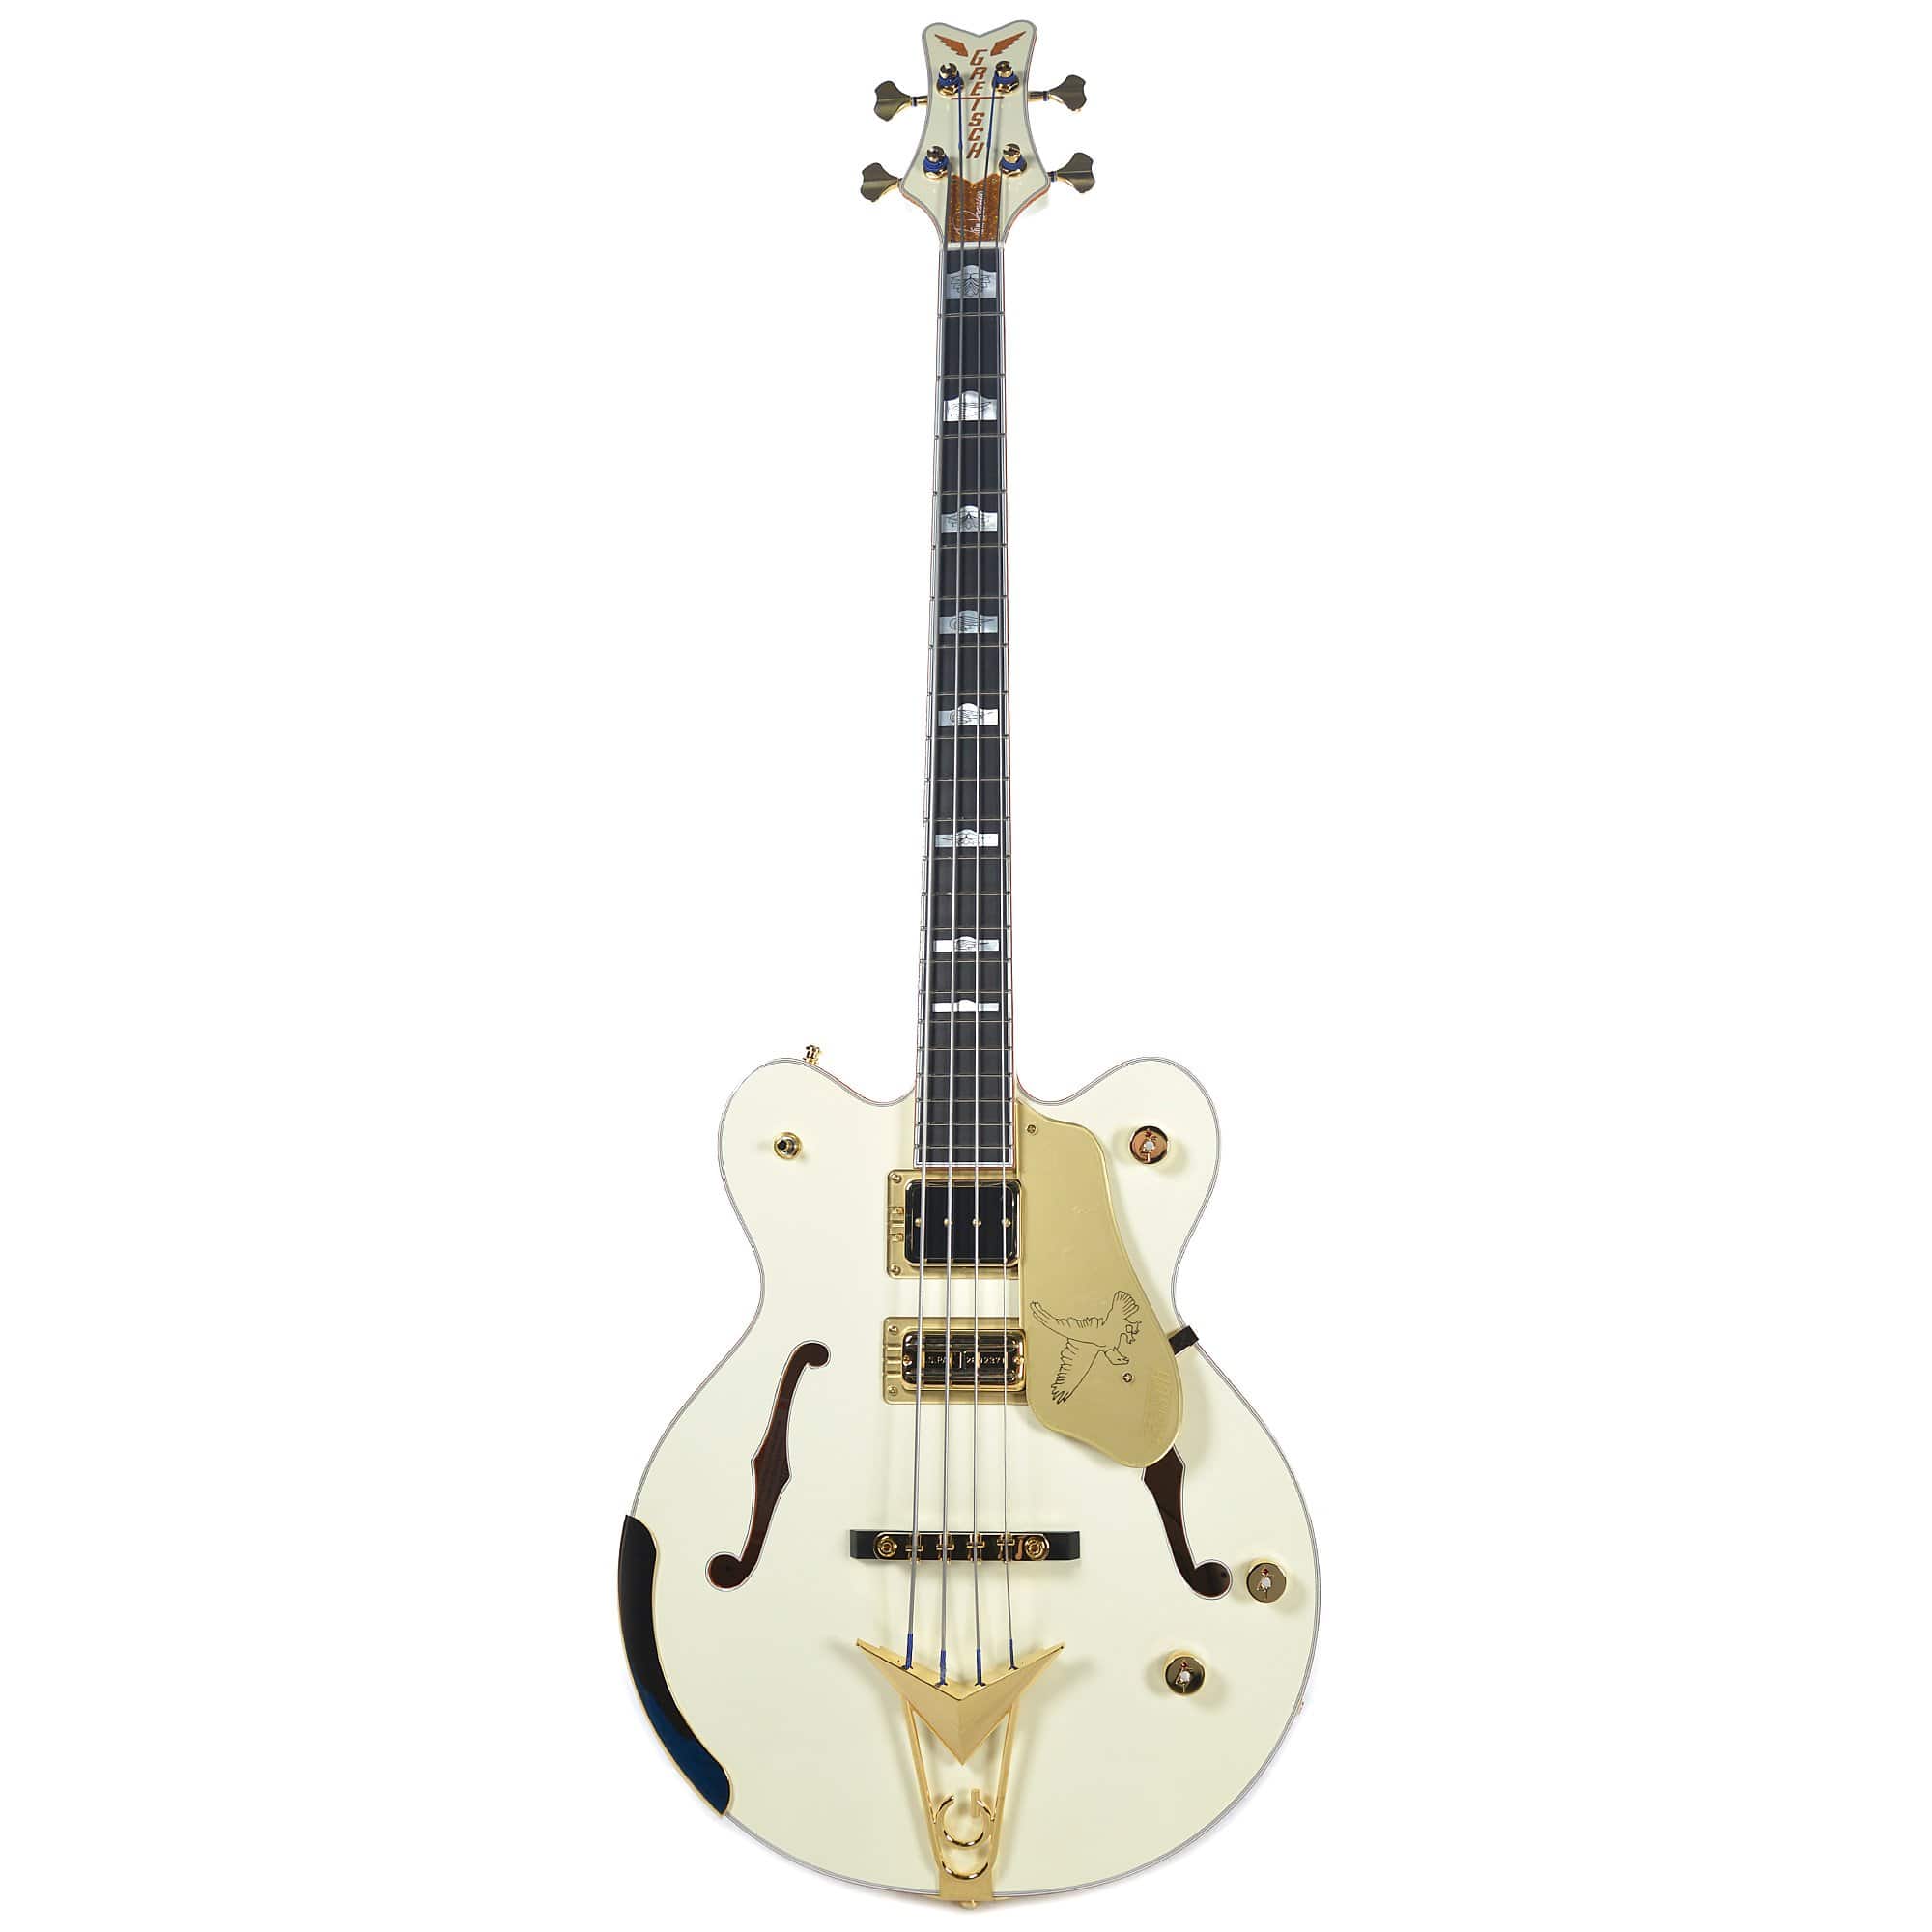 Gretsch G6136B-TP Tom Petersson Signature Falcon 4-String Bass Guitar - Aged White